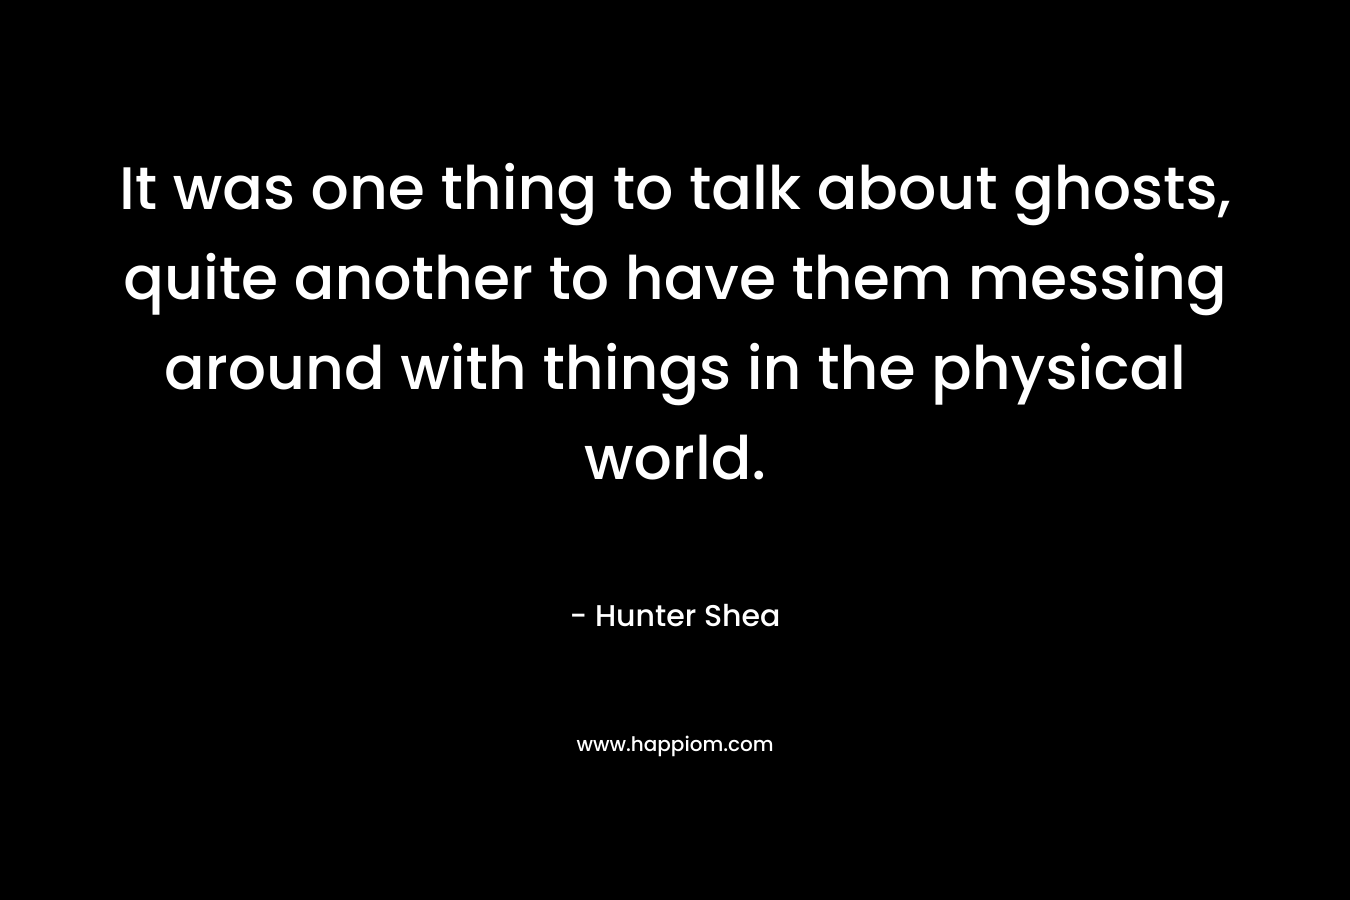 It was one thing to talk about ghosts, quite another to have them messing around with things in the physical world.